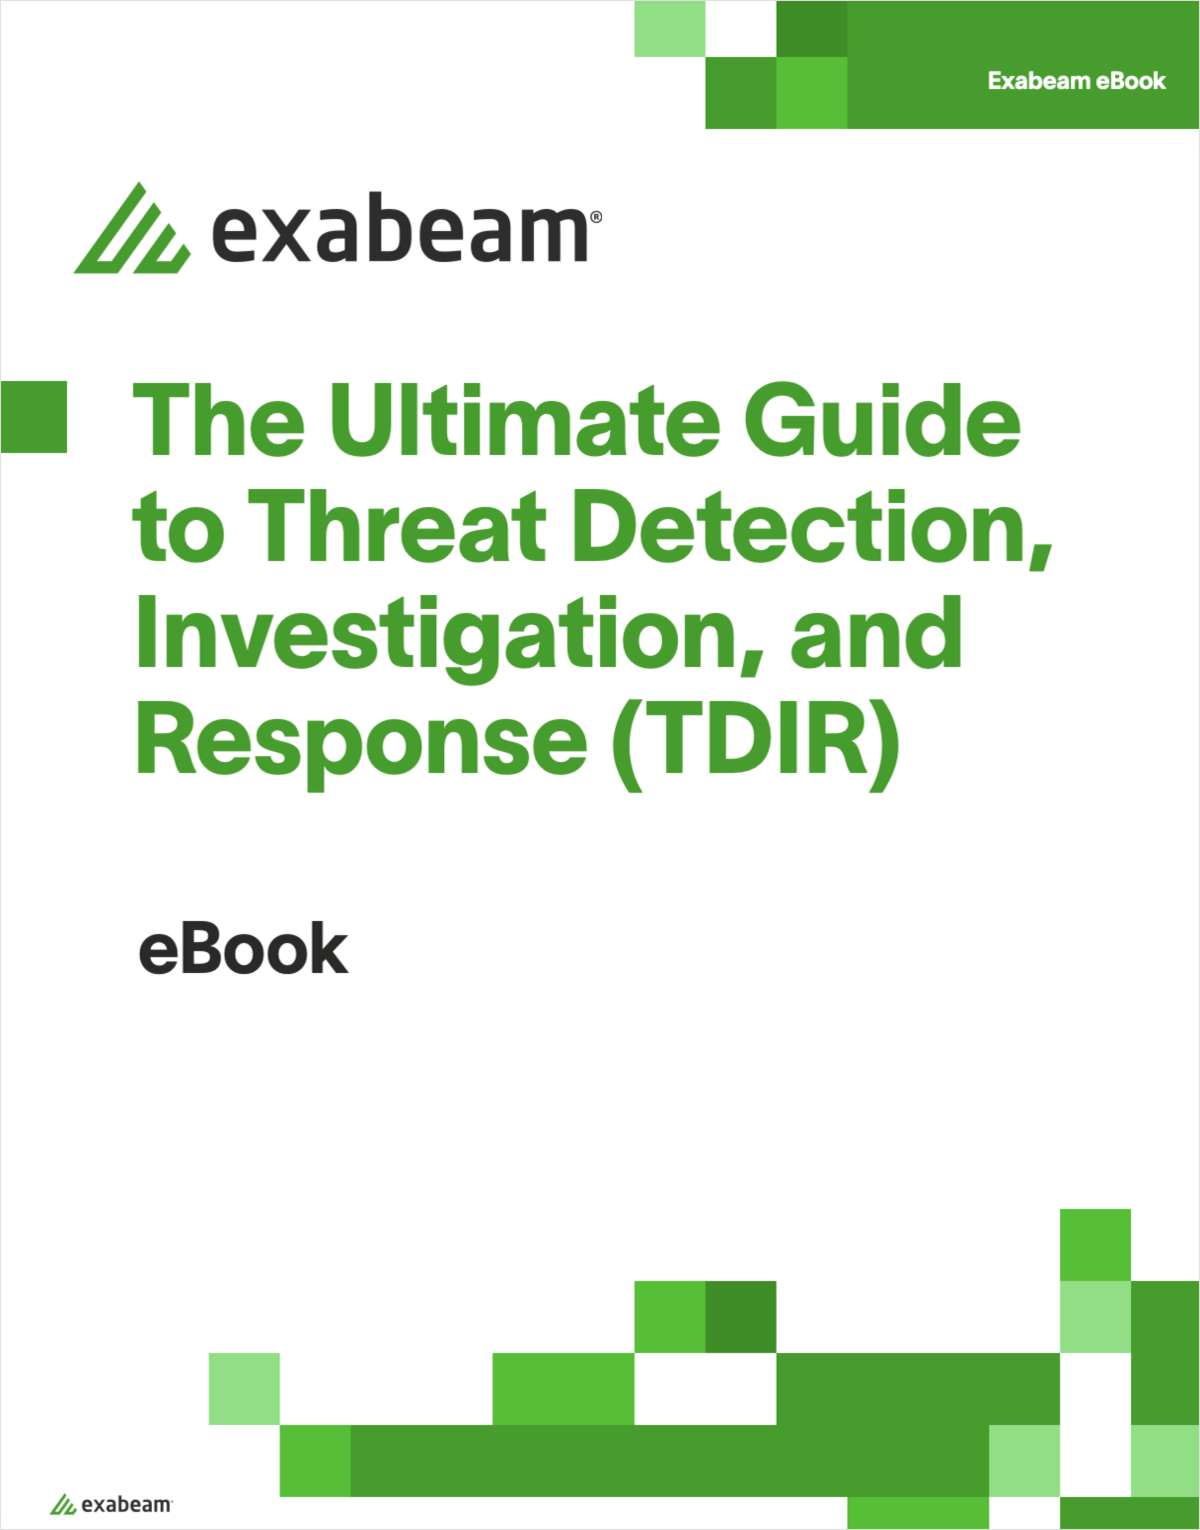 The Ultimate Guide to Threat Detection, Investigation, and Response (TDIR)